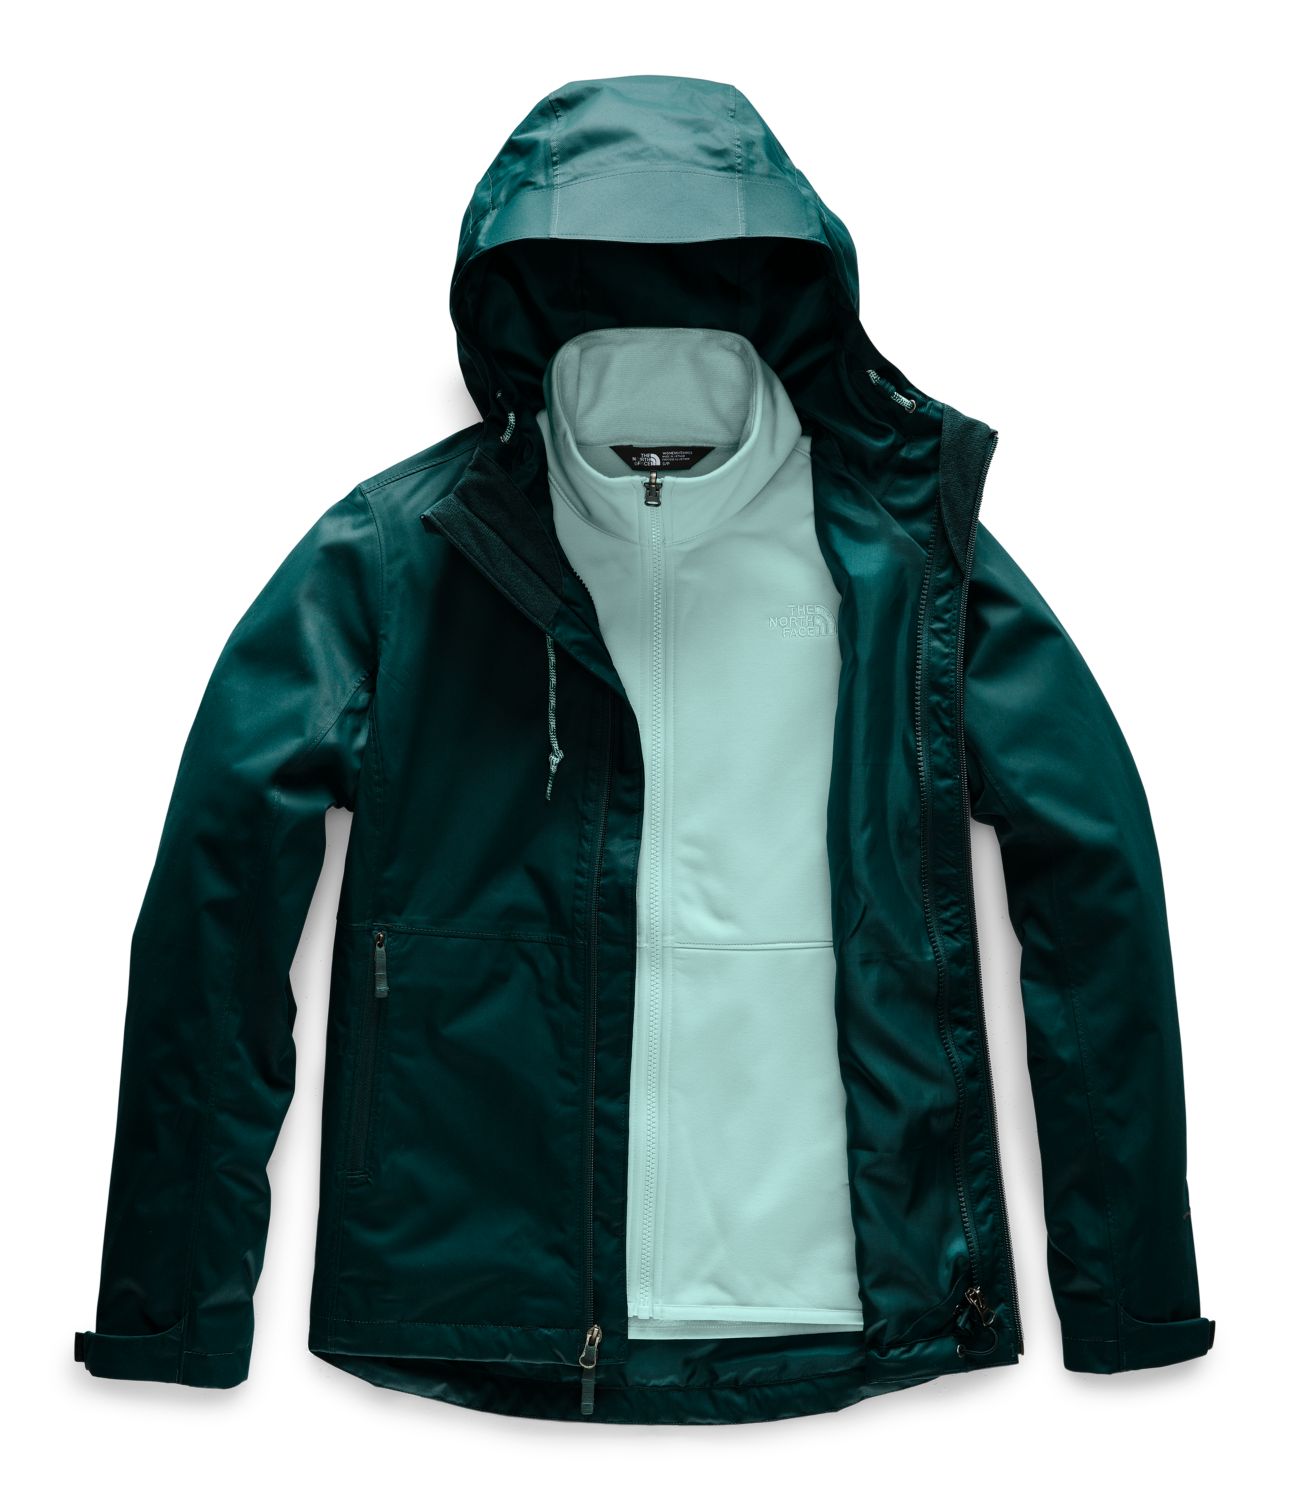 north face women's jacket cyber monday